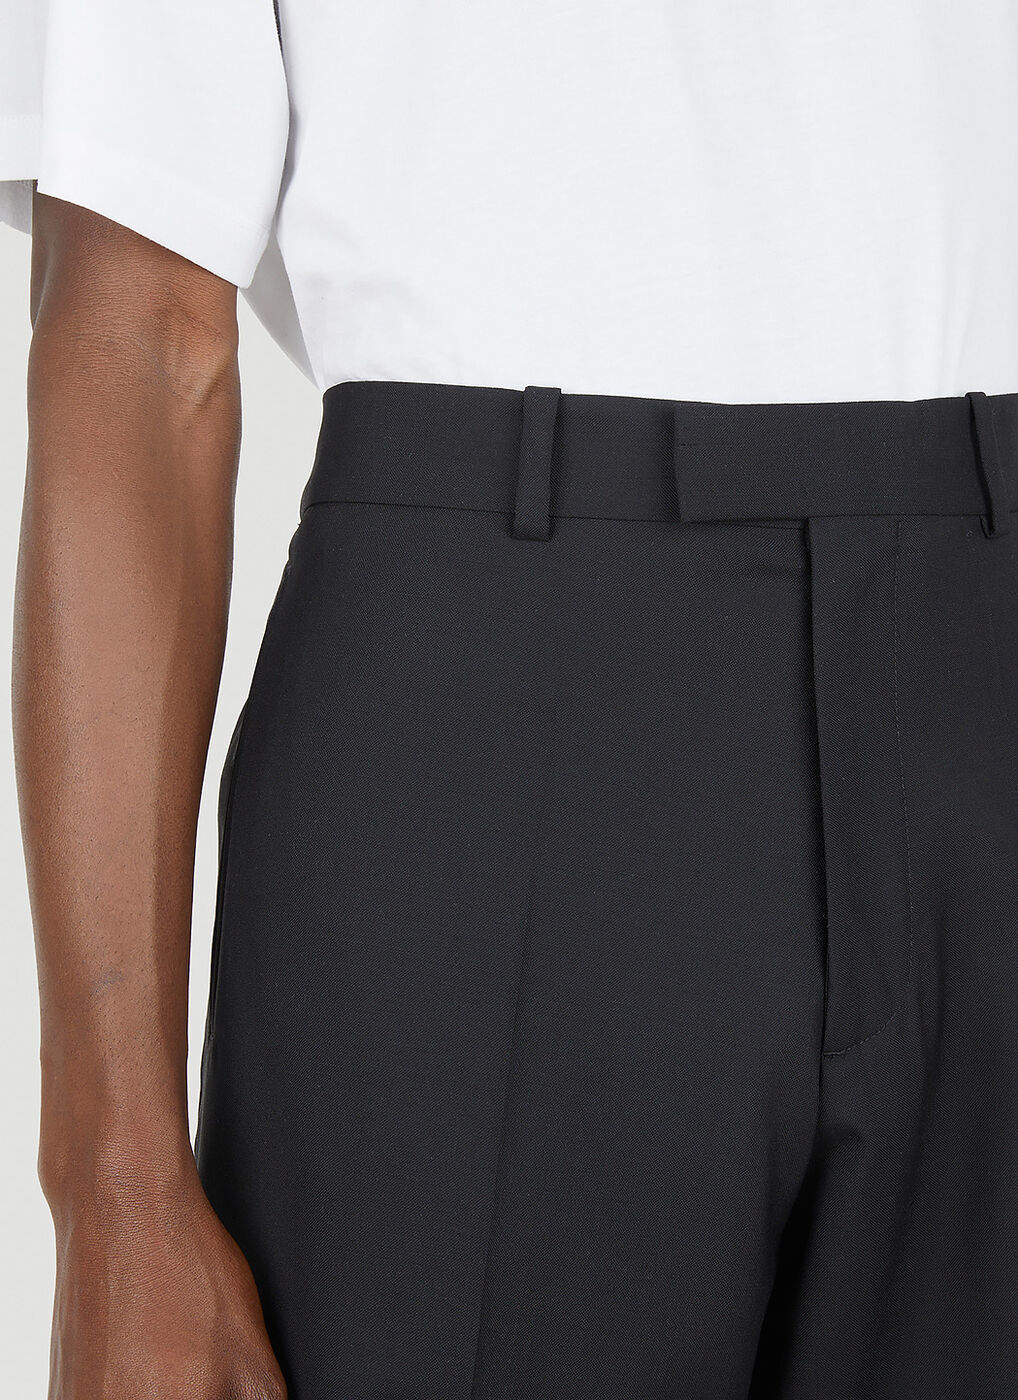 Tailored Classic Pants in Black Raf Simons